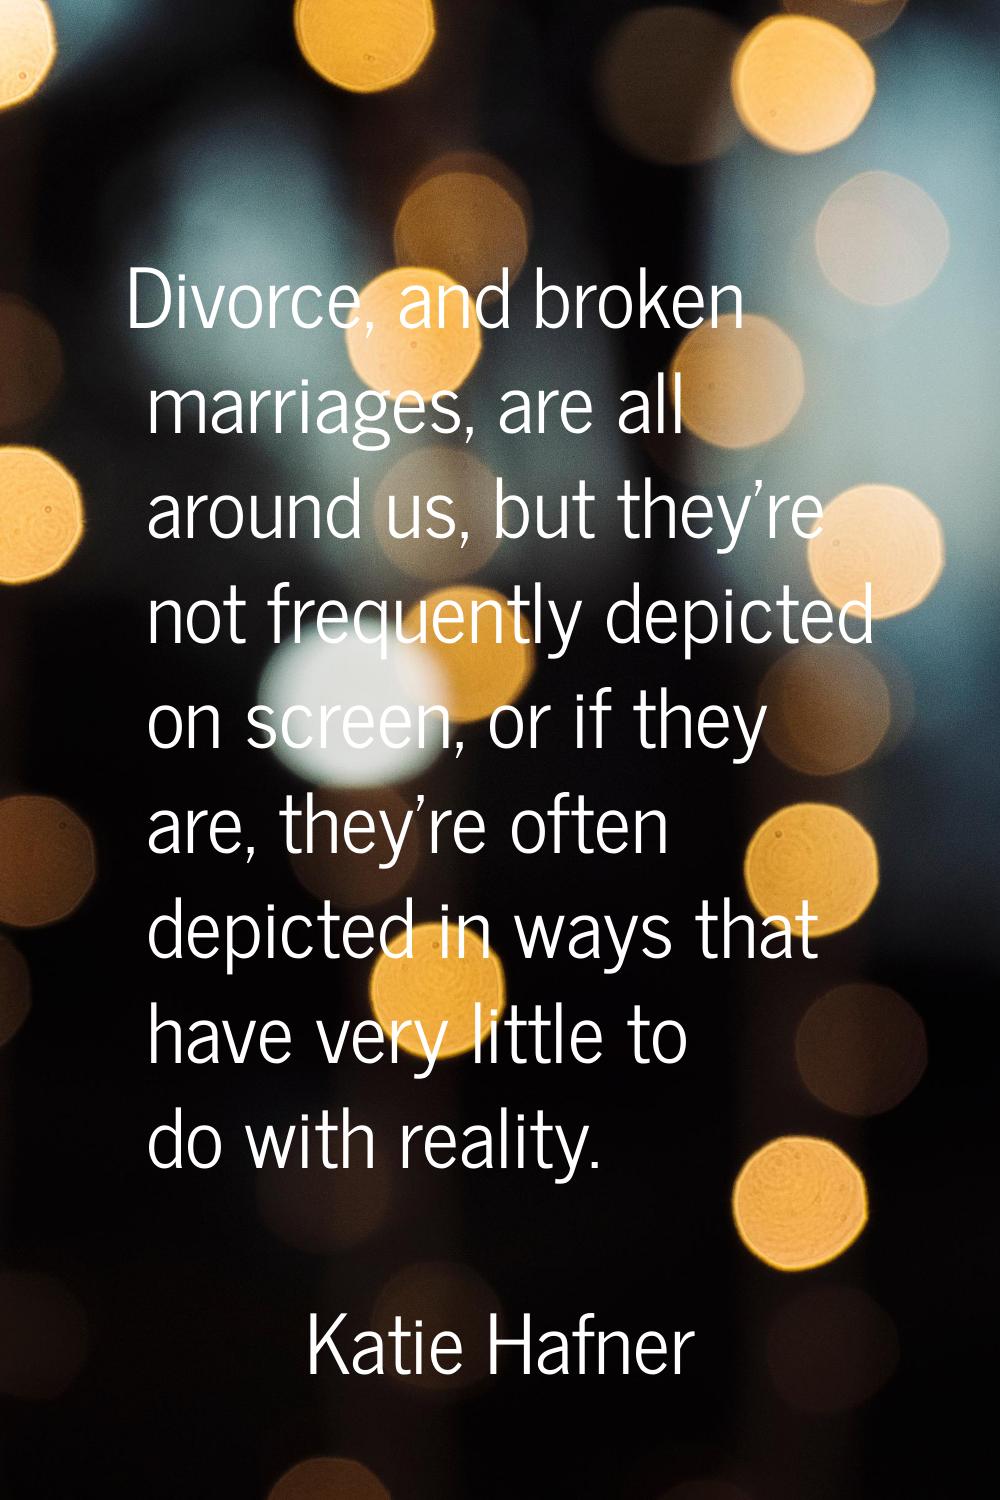 Divorce, and broken marriages, are all around us, but they're not frequently depicted on screen, or